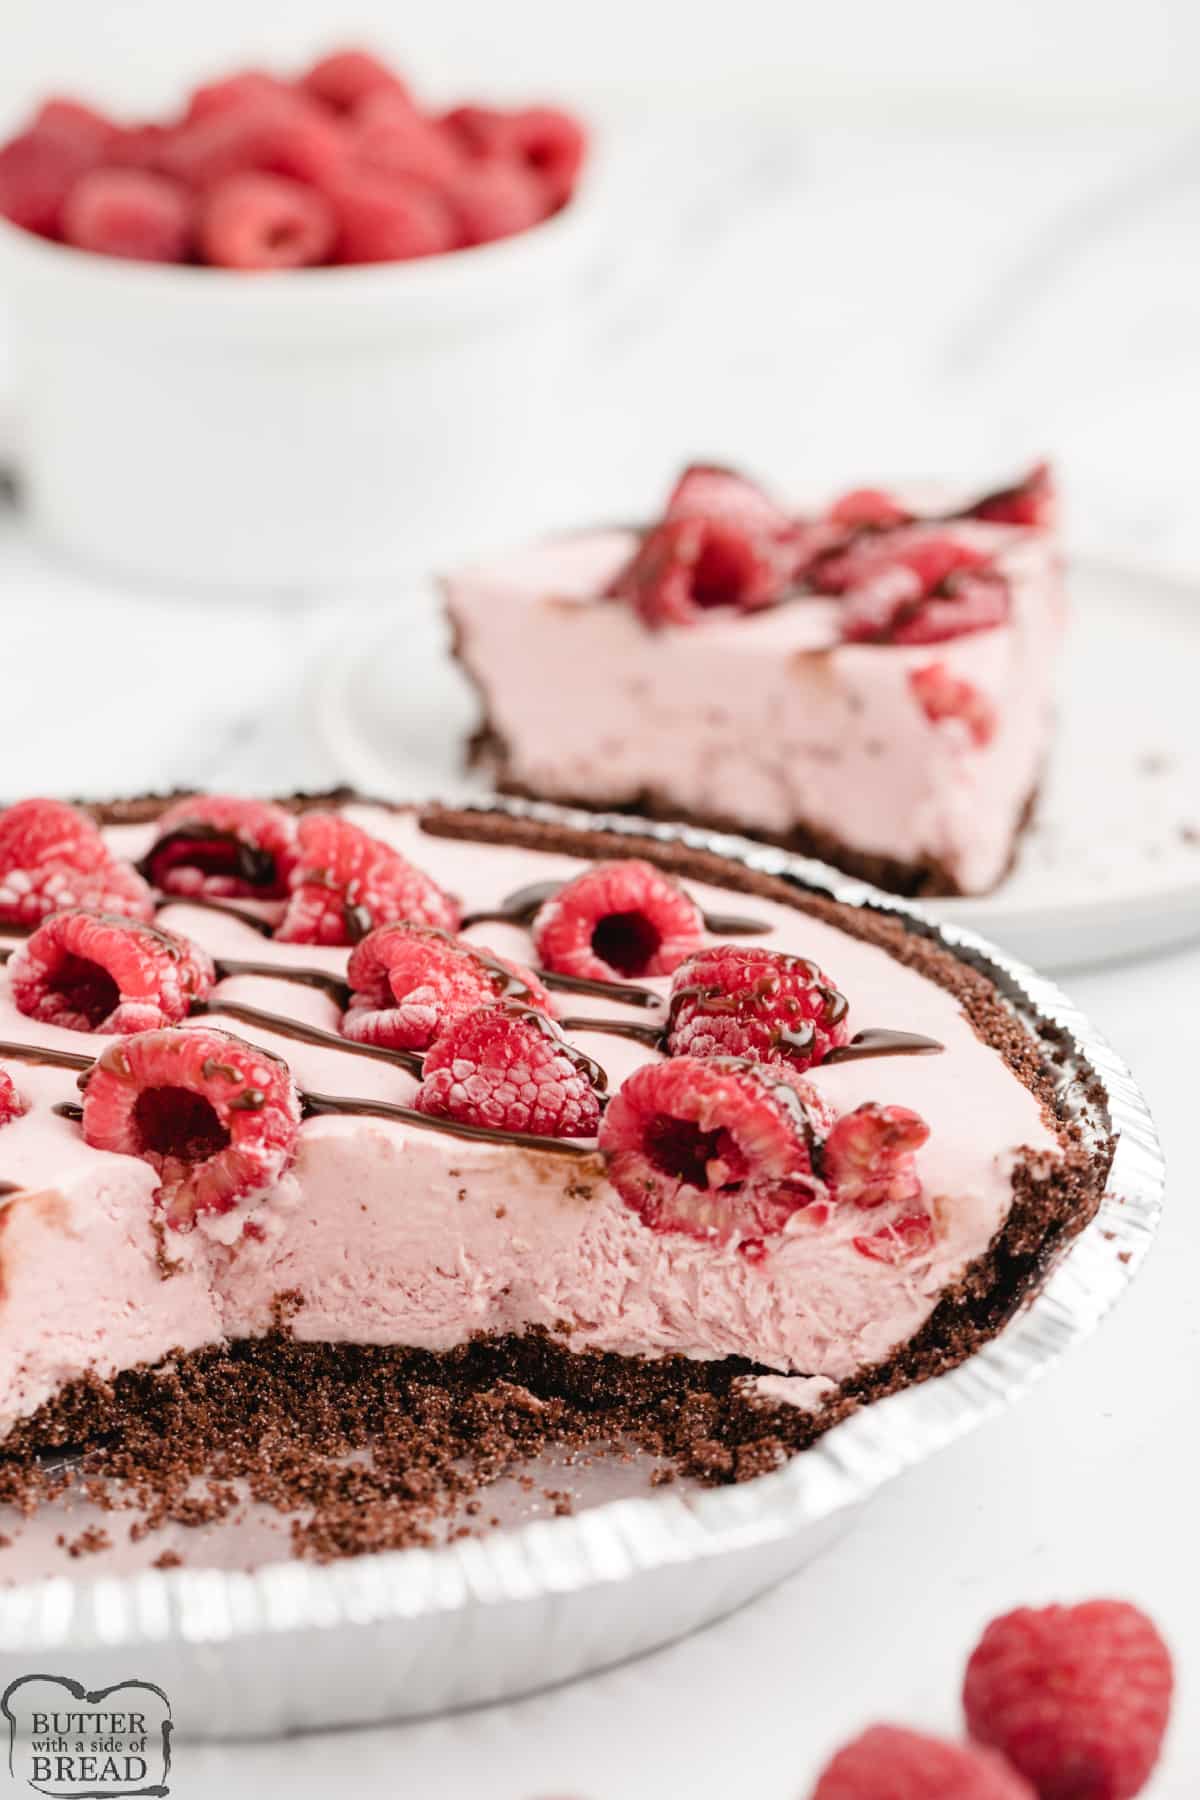 No-bake pie recipe with raspberries and whipping cream in a chocolate crust